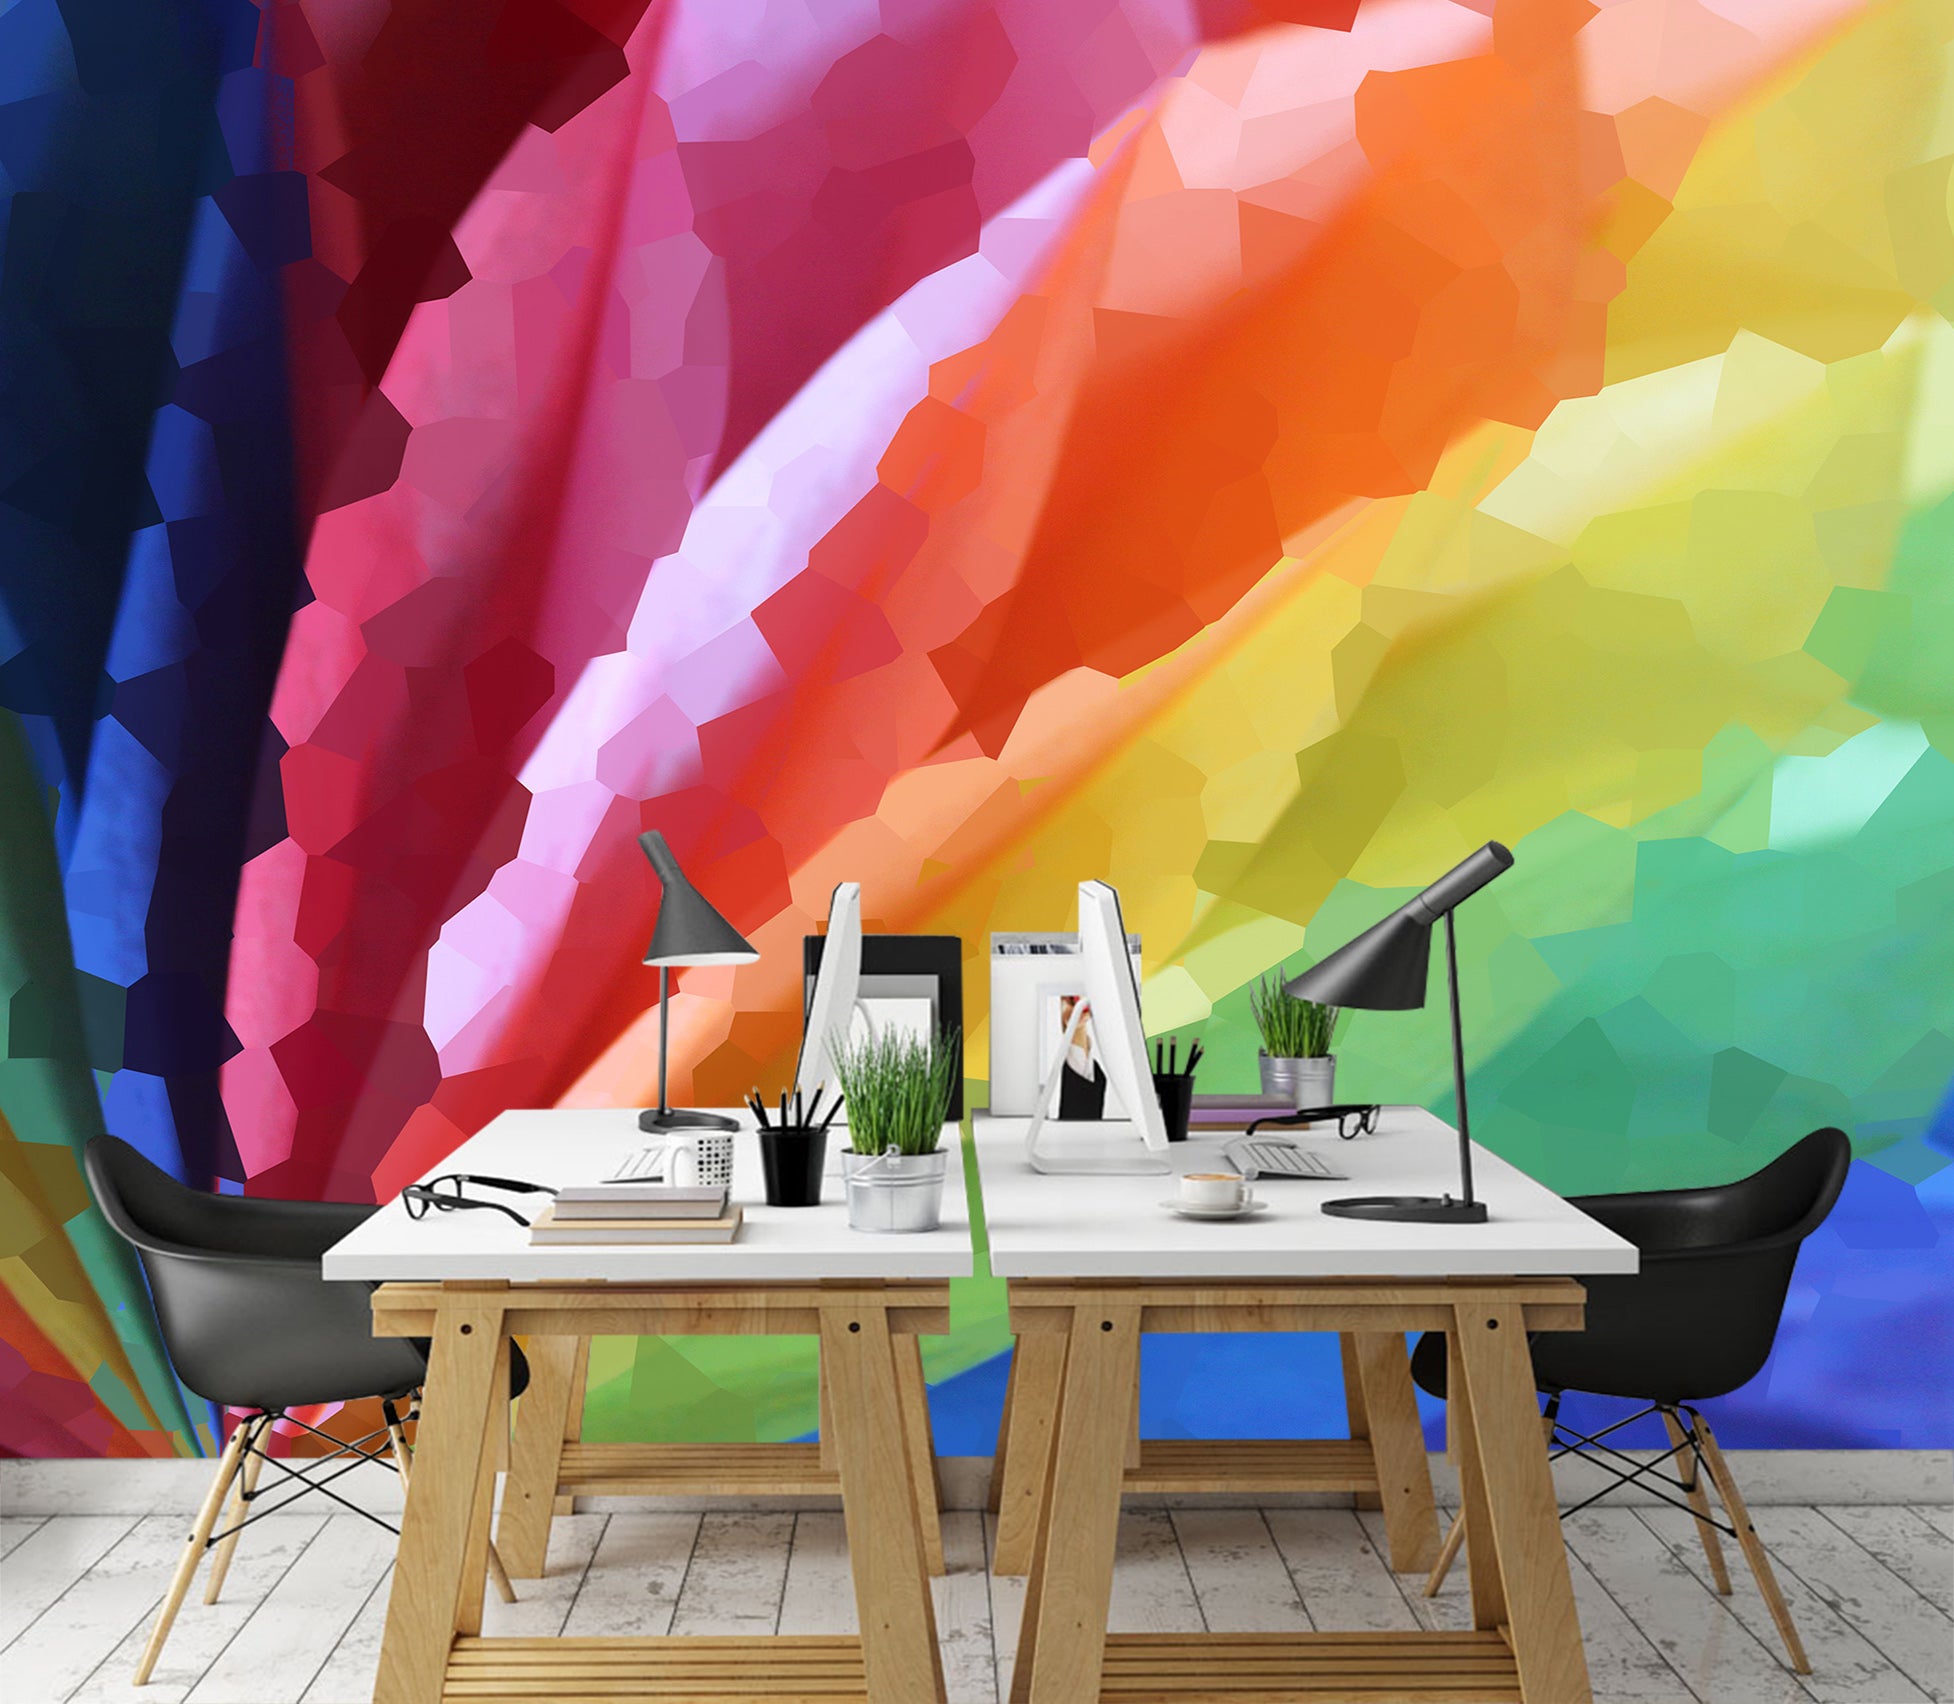 3D Colorful Texture 19119 Shandra Smith Wall Mural Wall Murals